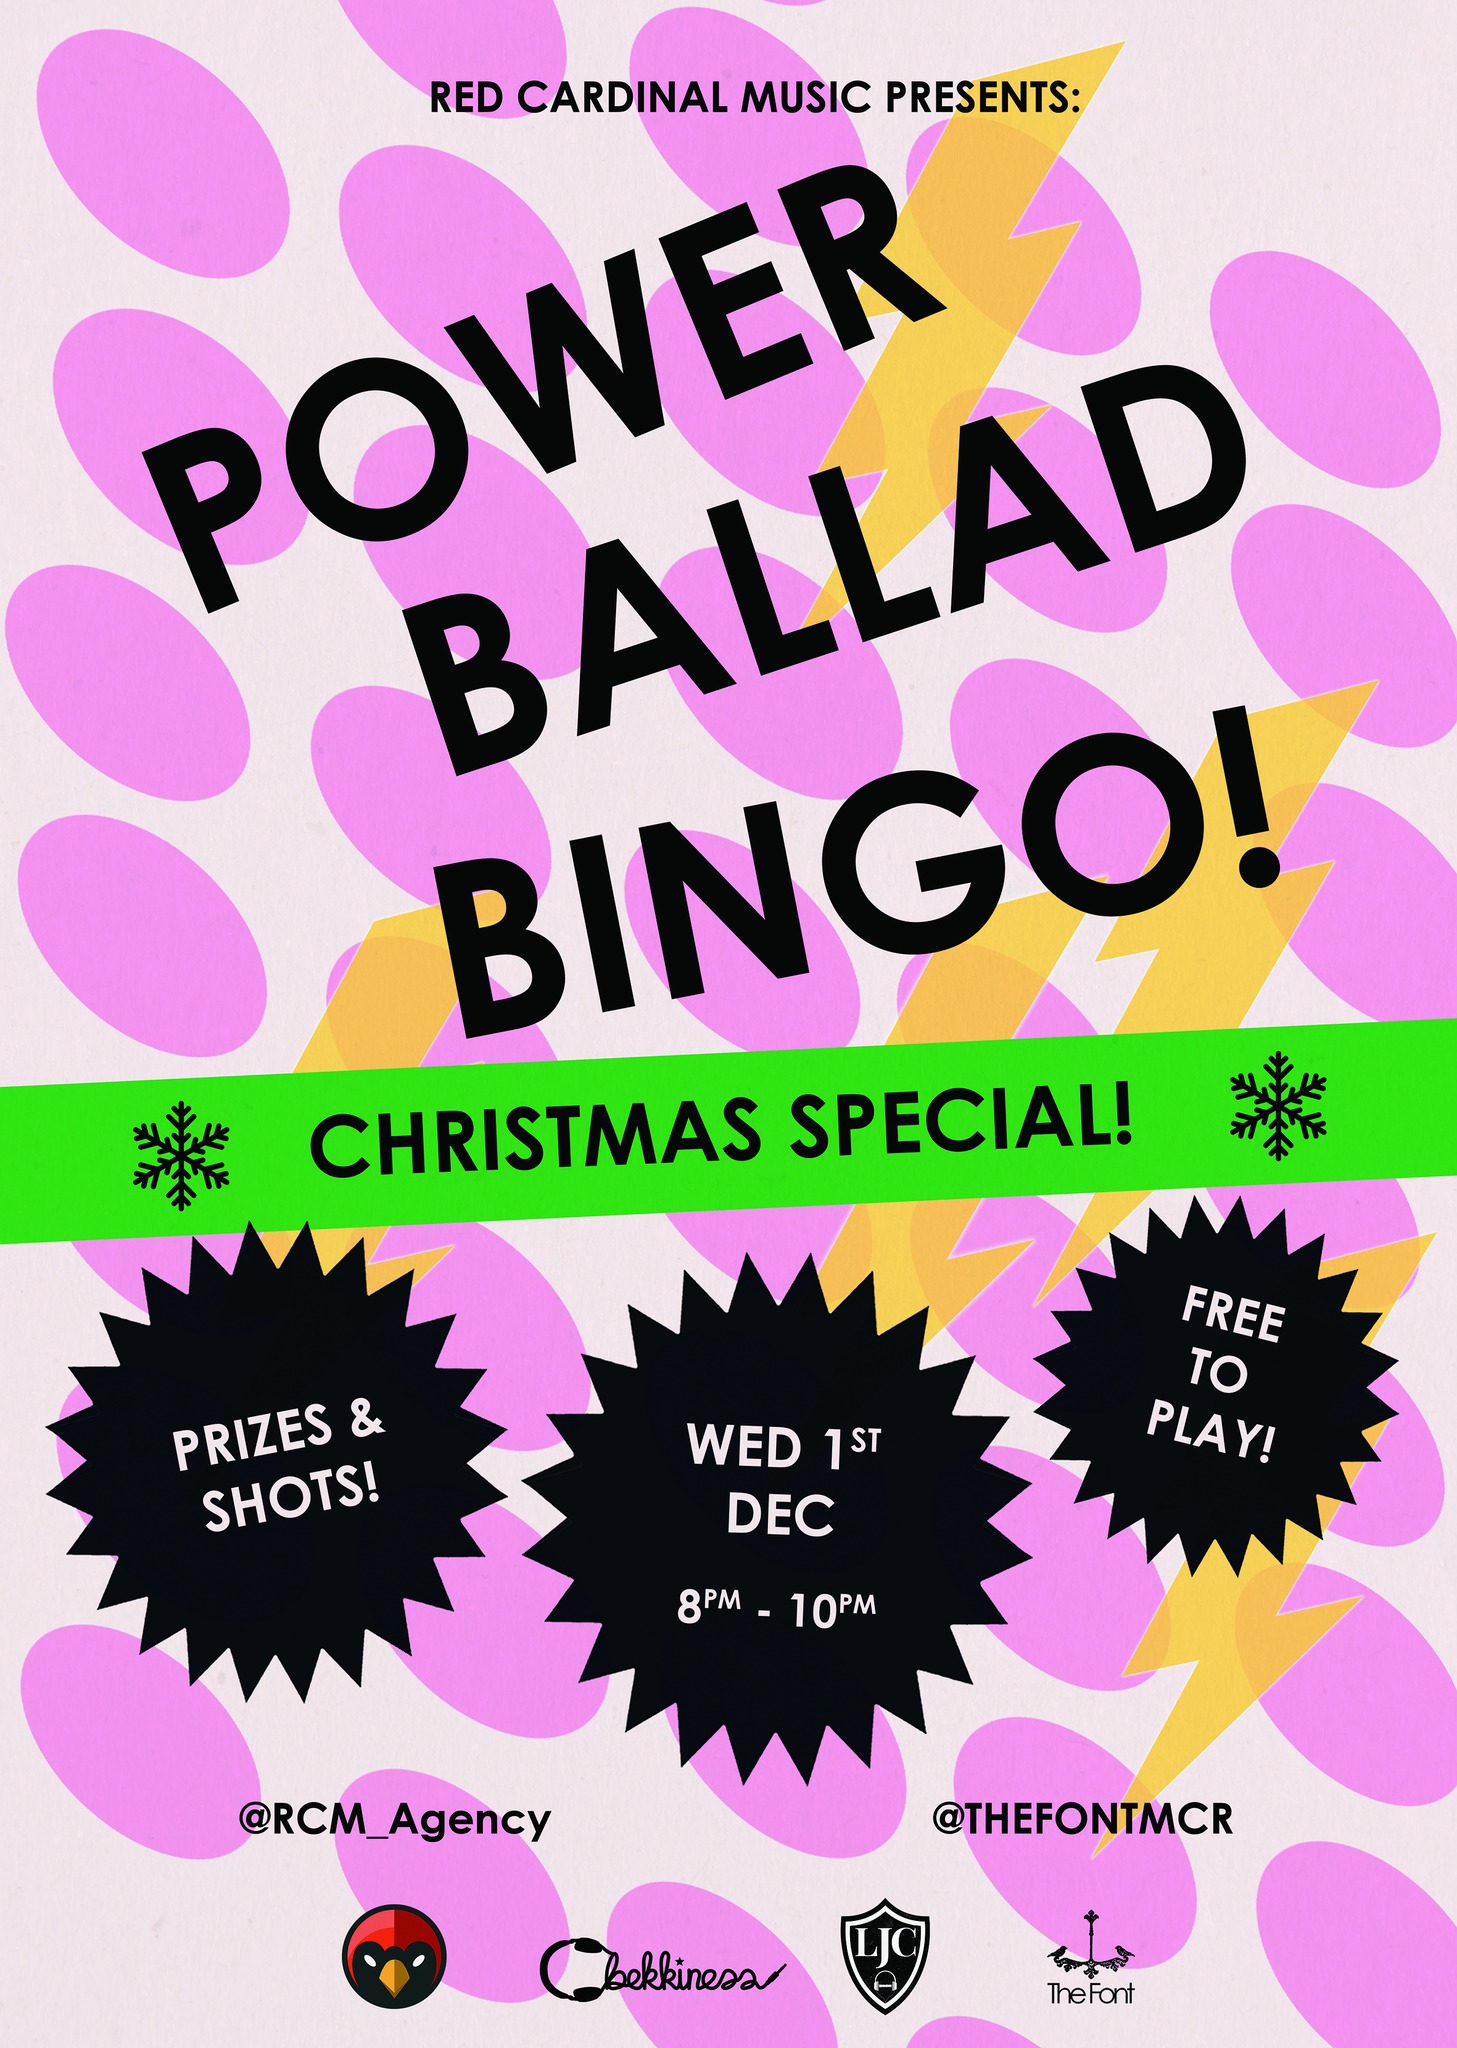 Red Cardinal Music - The Power Ballad Bingo - Christmas Special - The Font